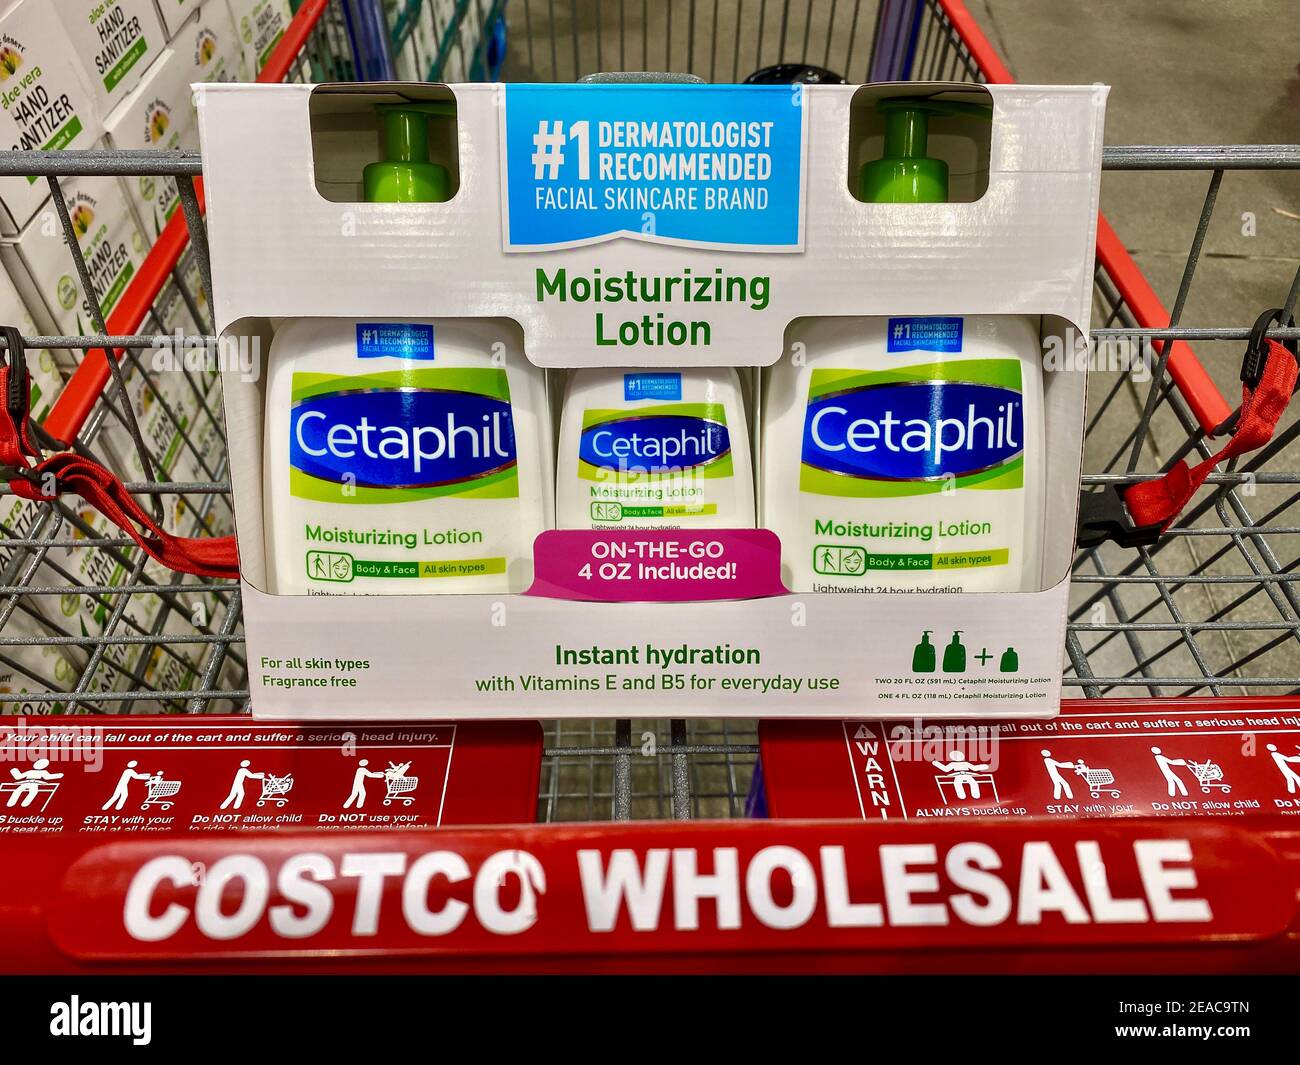 Cetaphil Moisturizing Lotion multipack in a Costco Cart Stock Photo